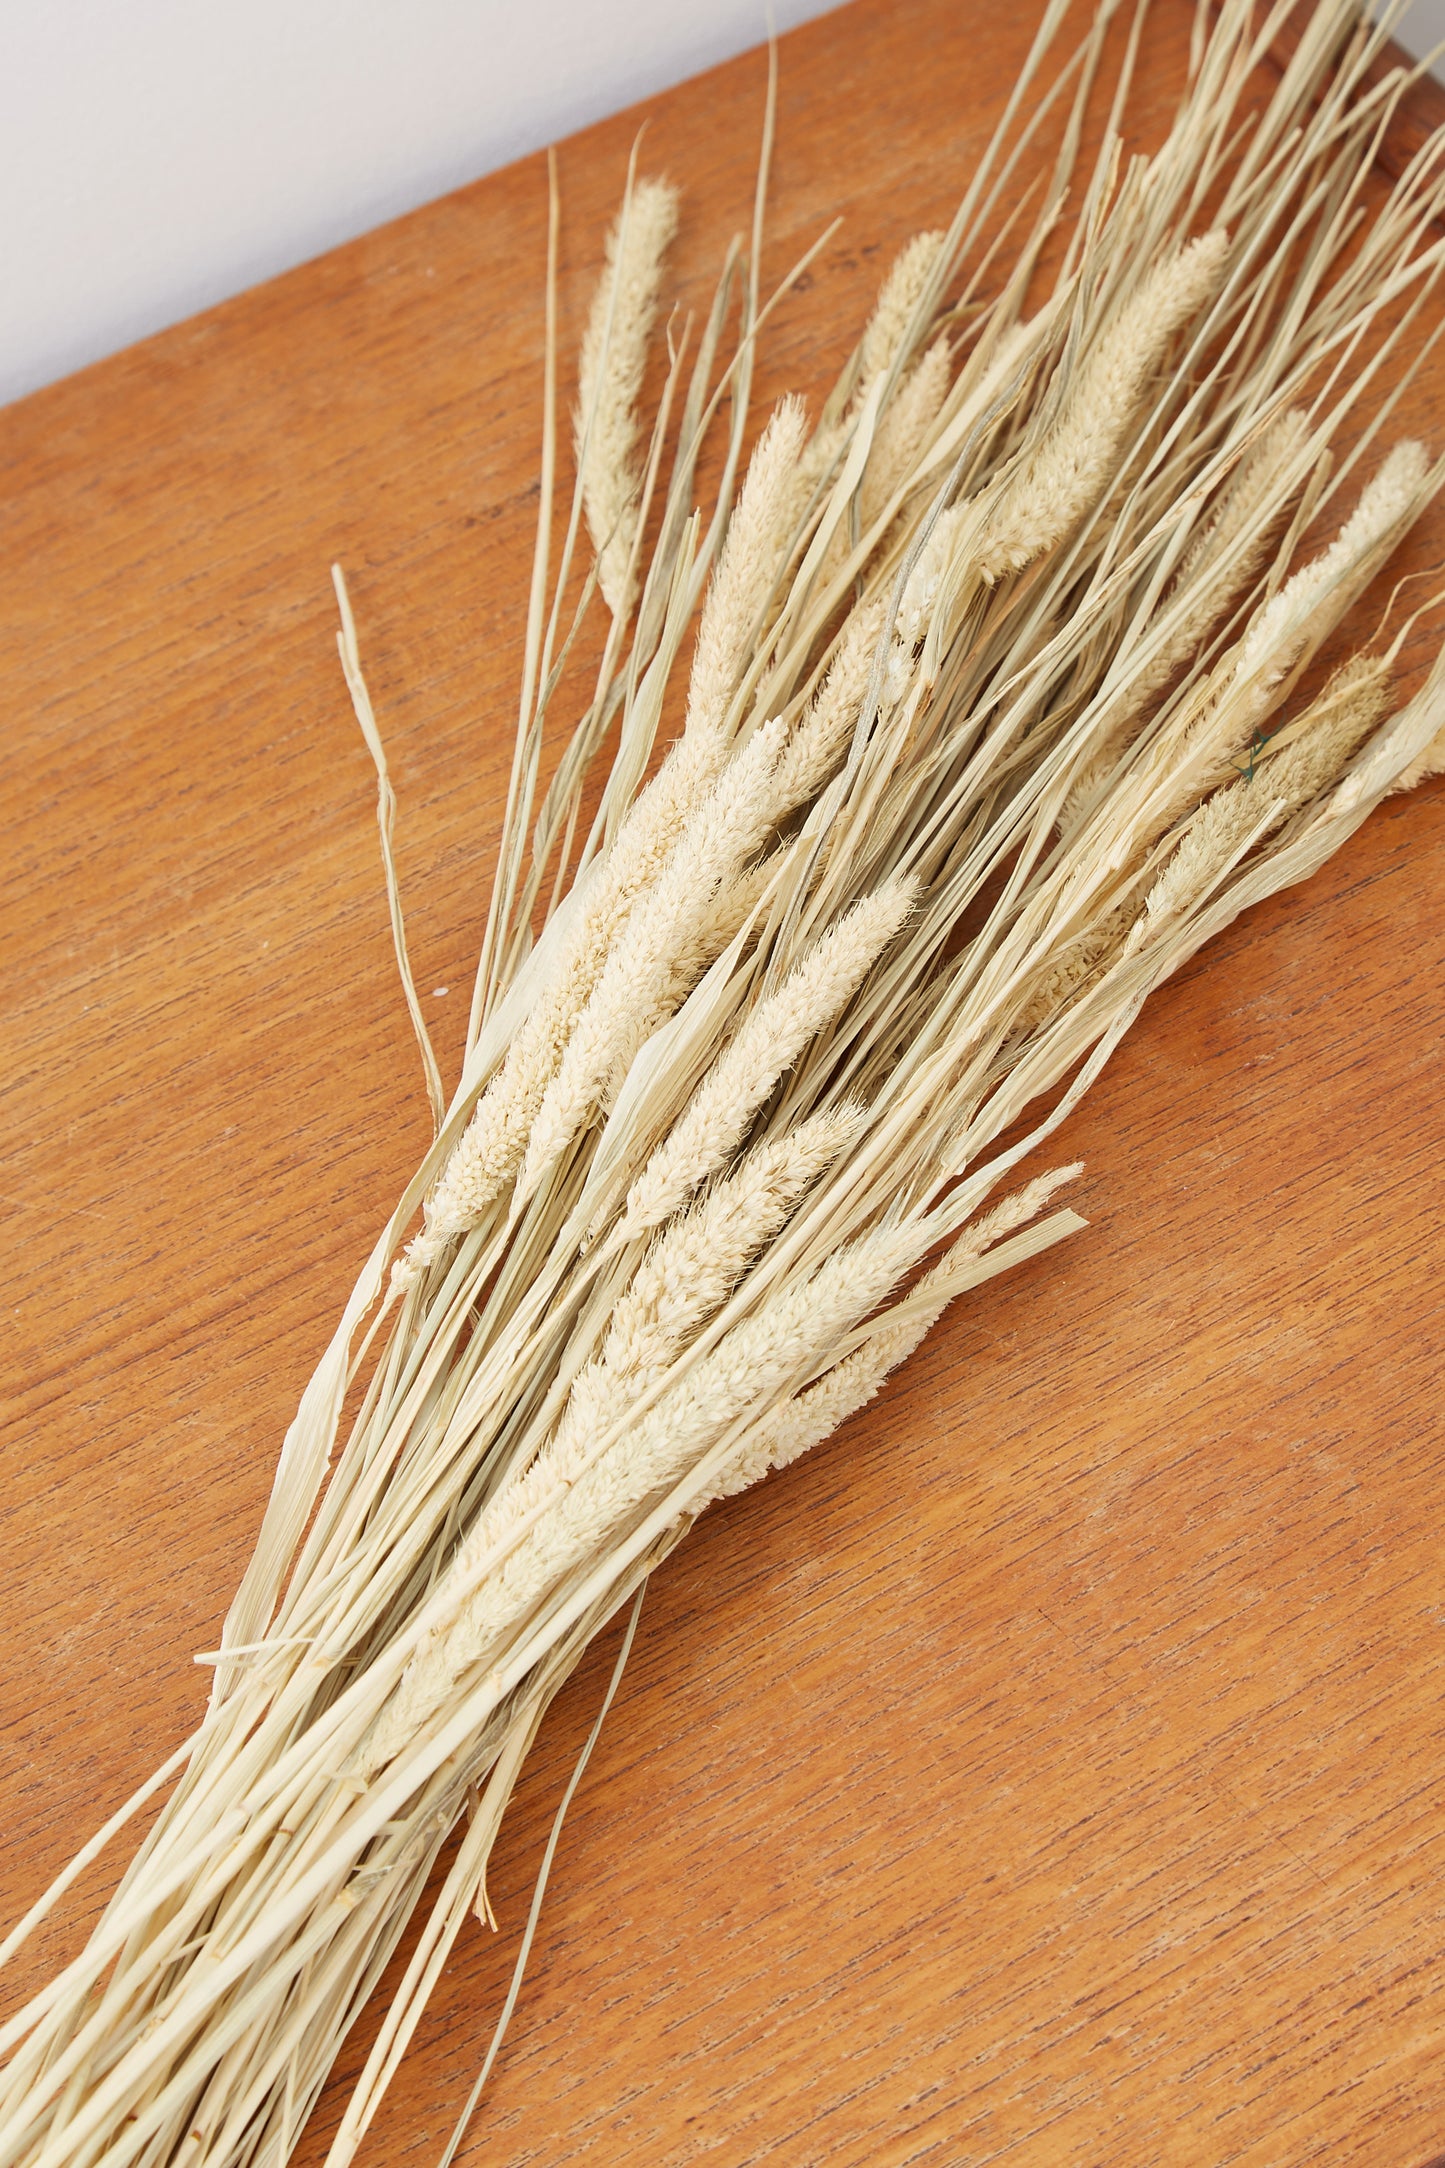 Dried Cats Tail Grass